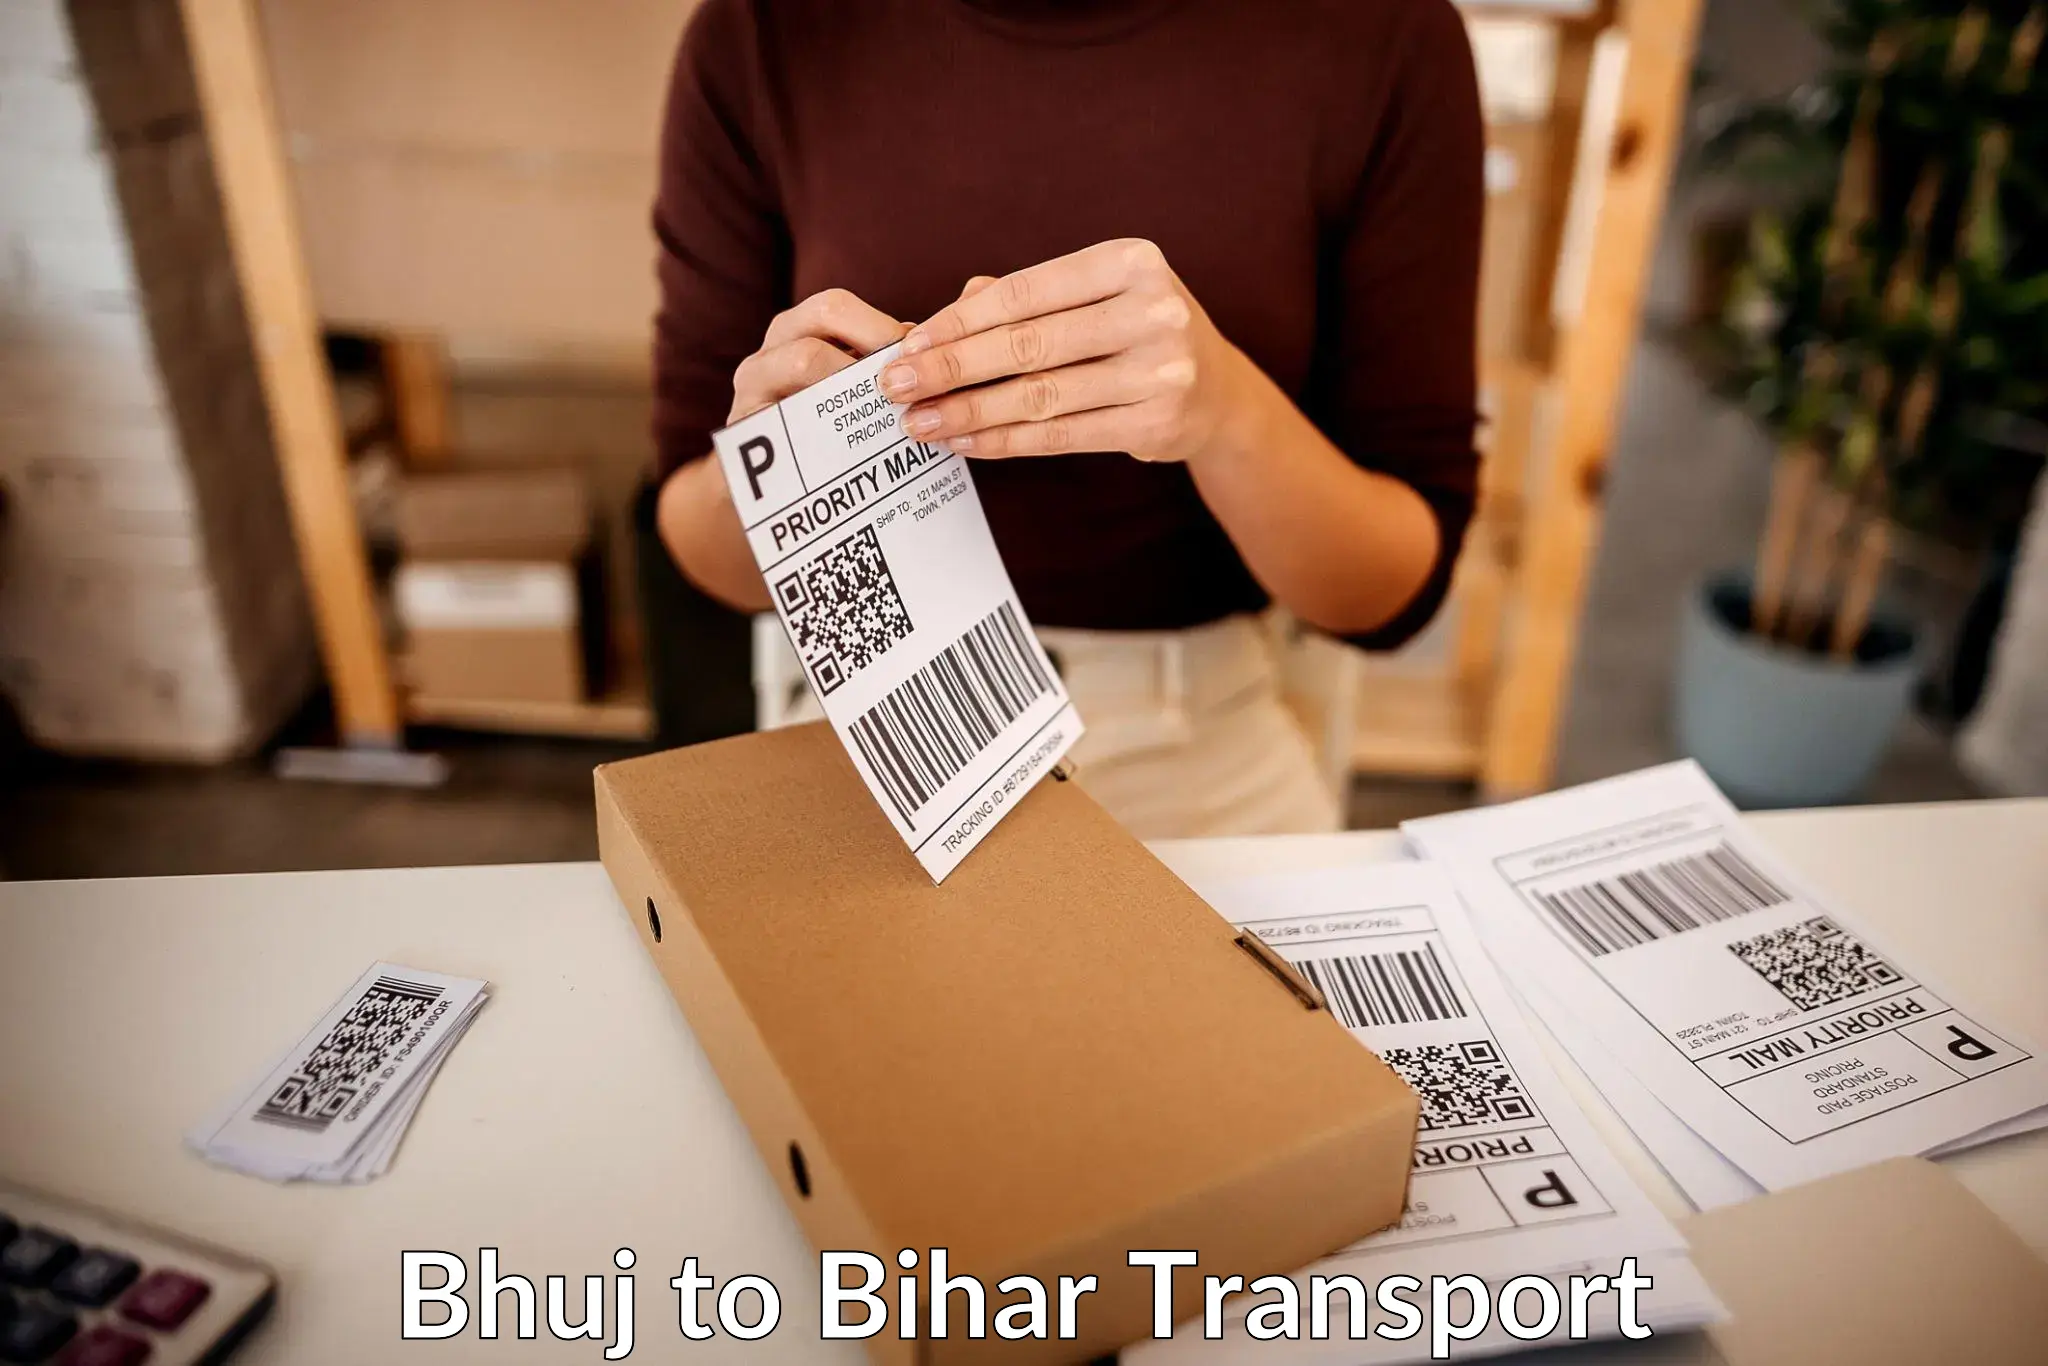 Daily parcel service transport Bhuj to Bankipore